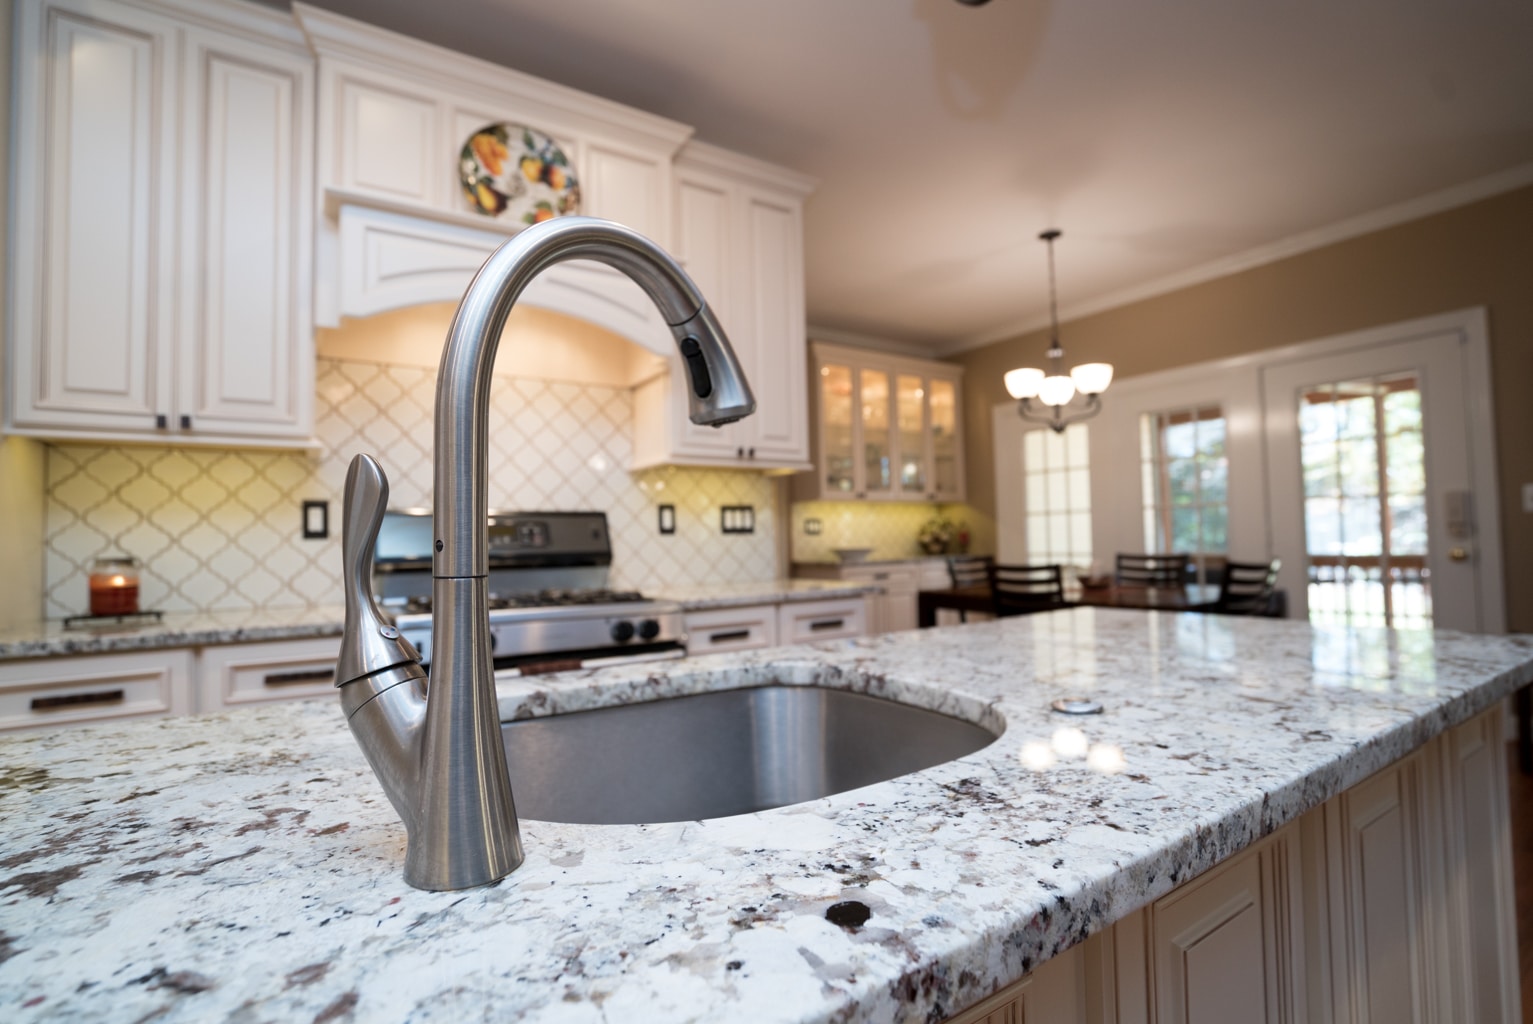 A modern kitchen with sleek granite countertops and a shiny stainless steel sink